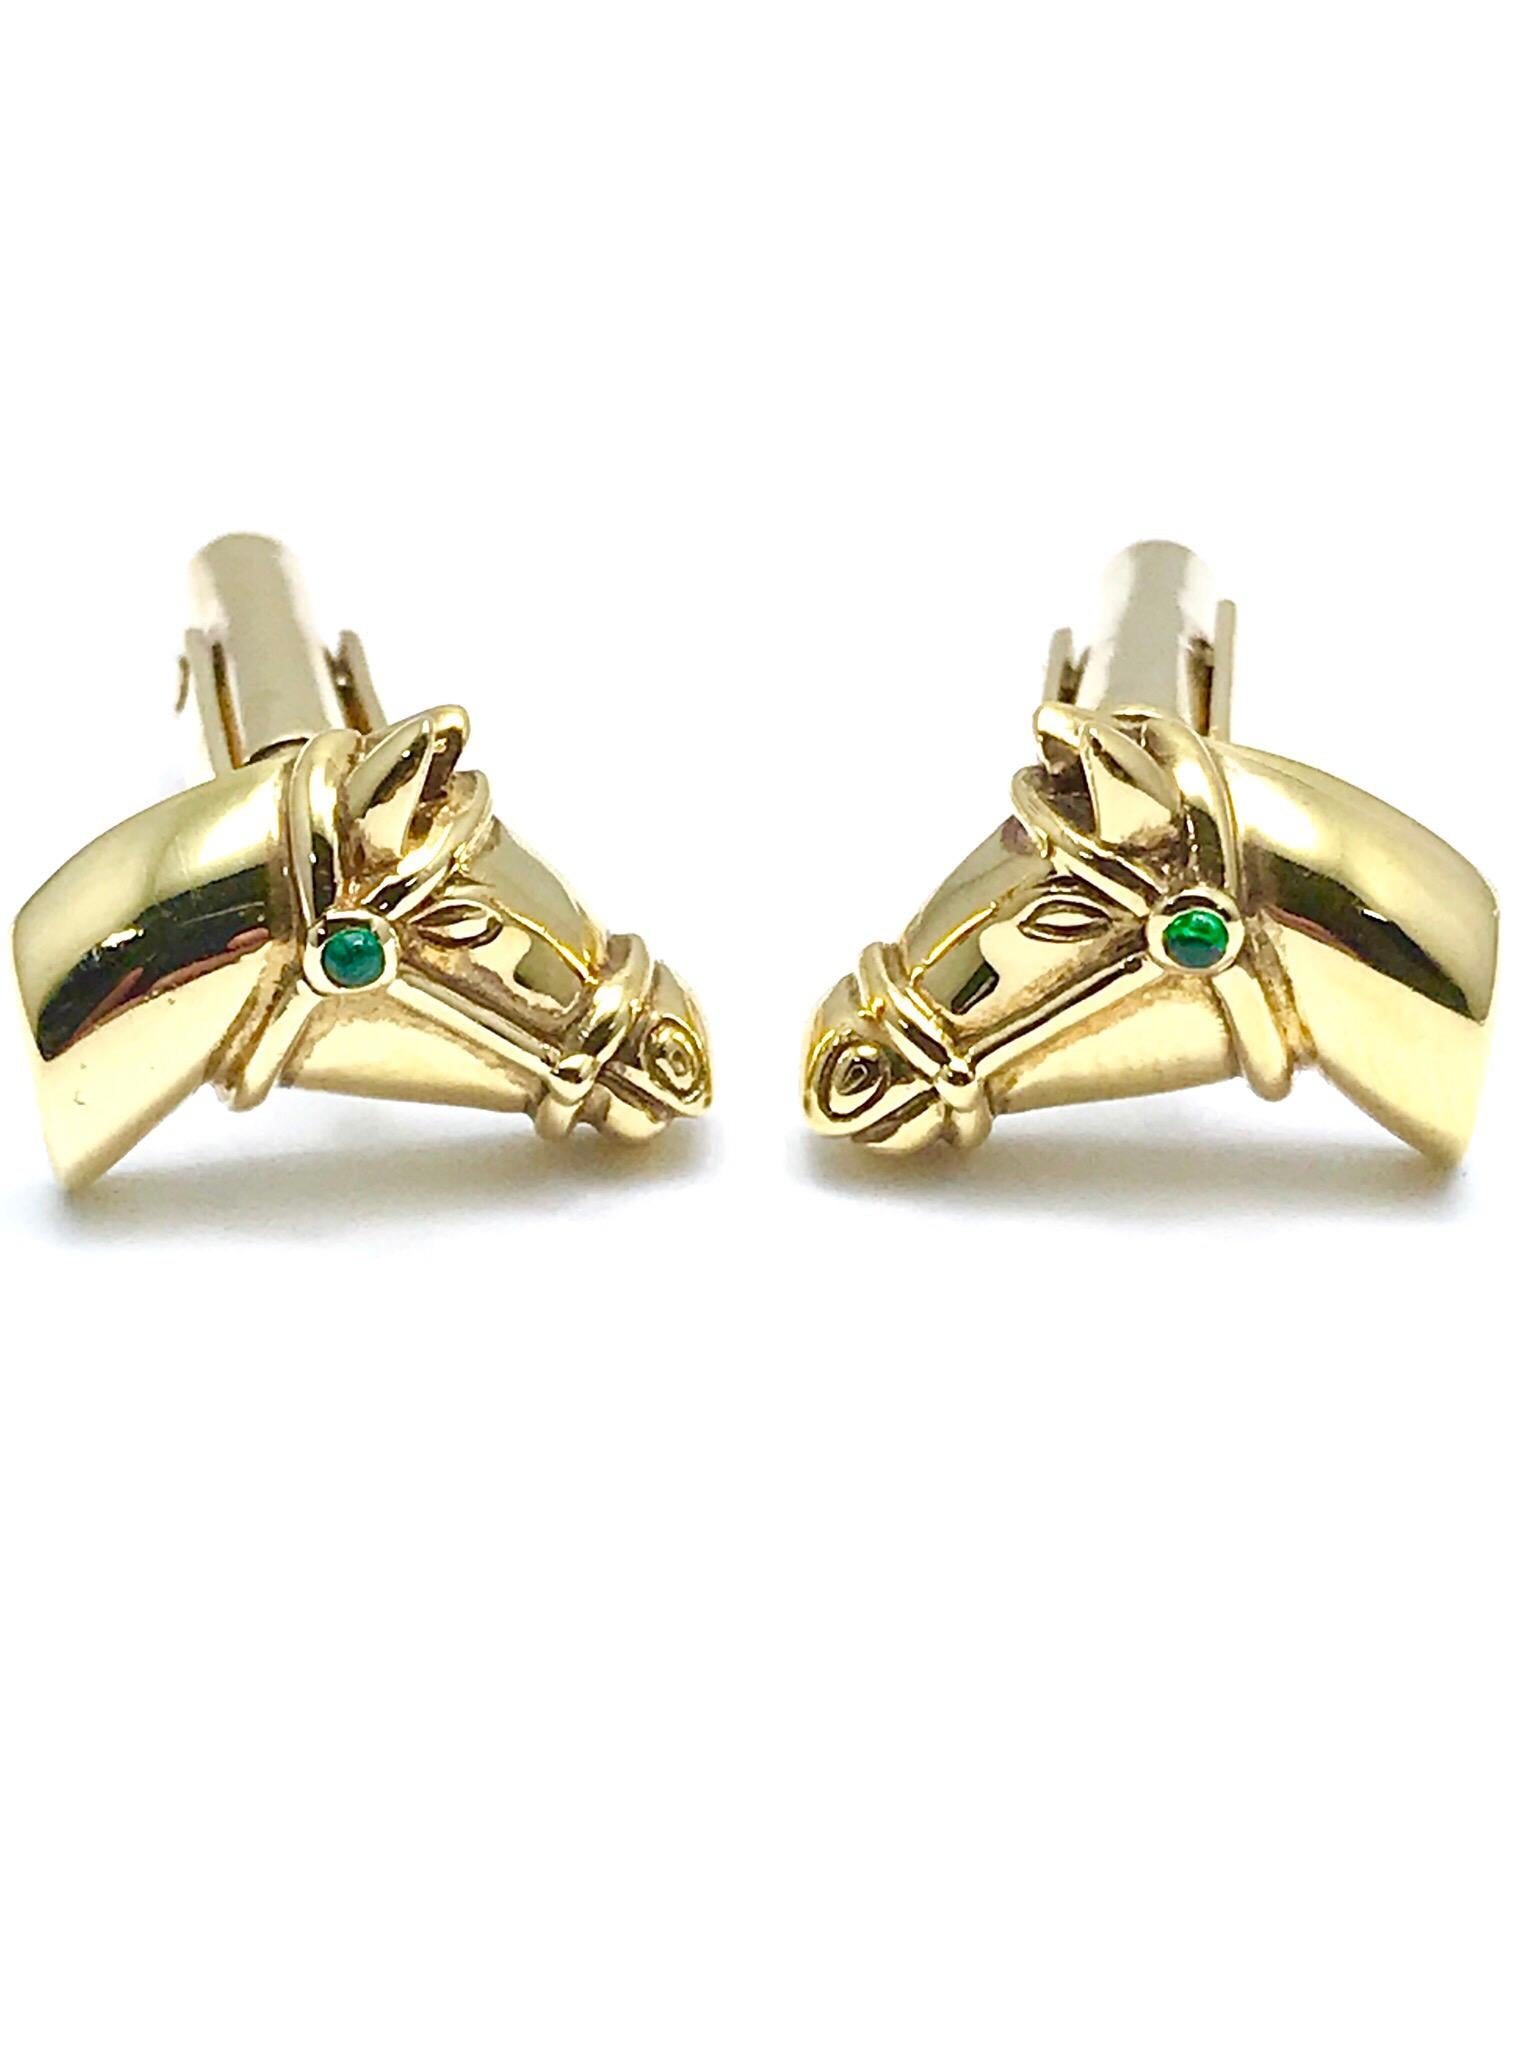 The perfect cufflinks for any horse enthusiast!  These are made in 18 karat yellow gold, with a cabochon emerald on the horse's bridle.  The horse's face shows great detail.  The cufflinks have a simple toggle back for ease of use.  The horse head